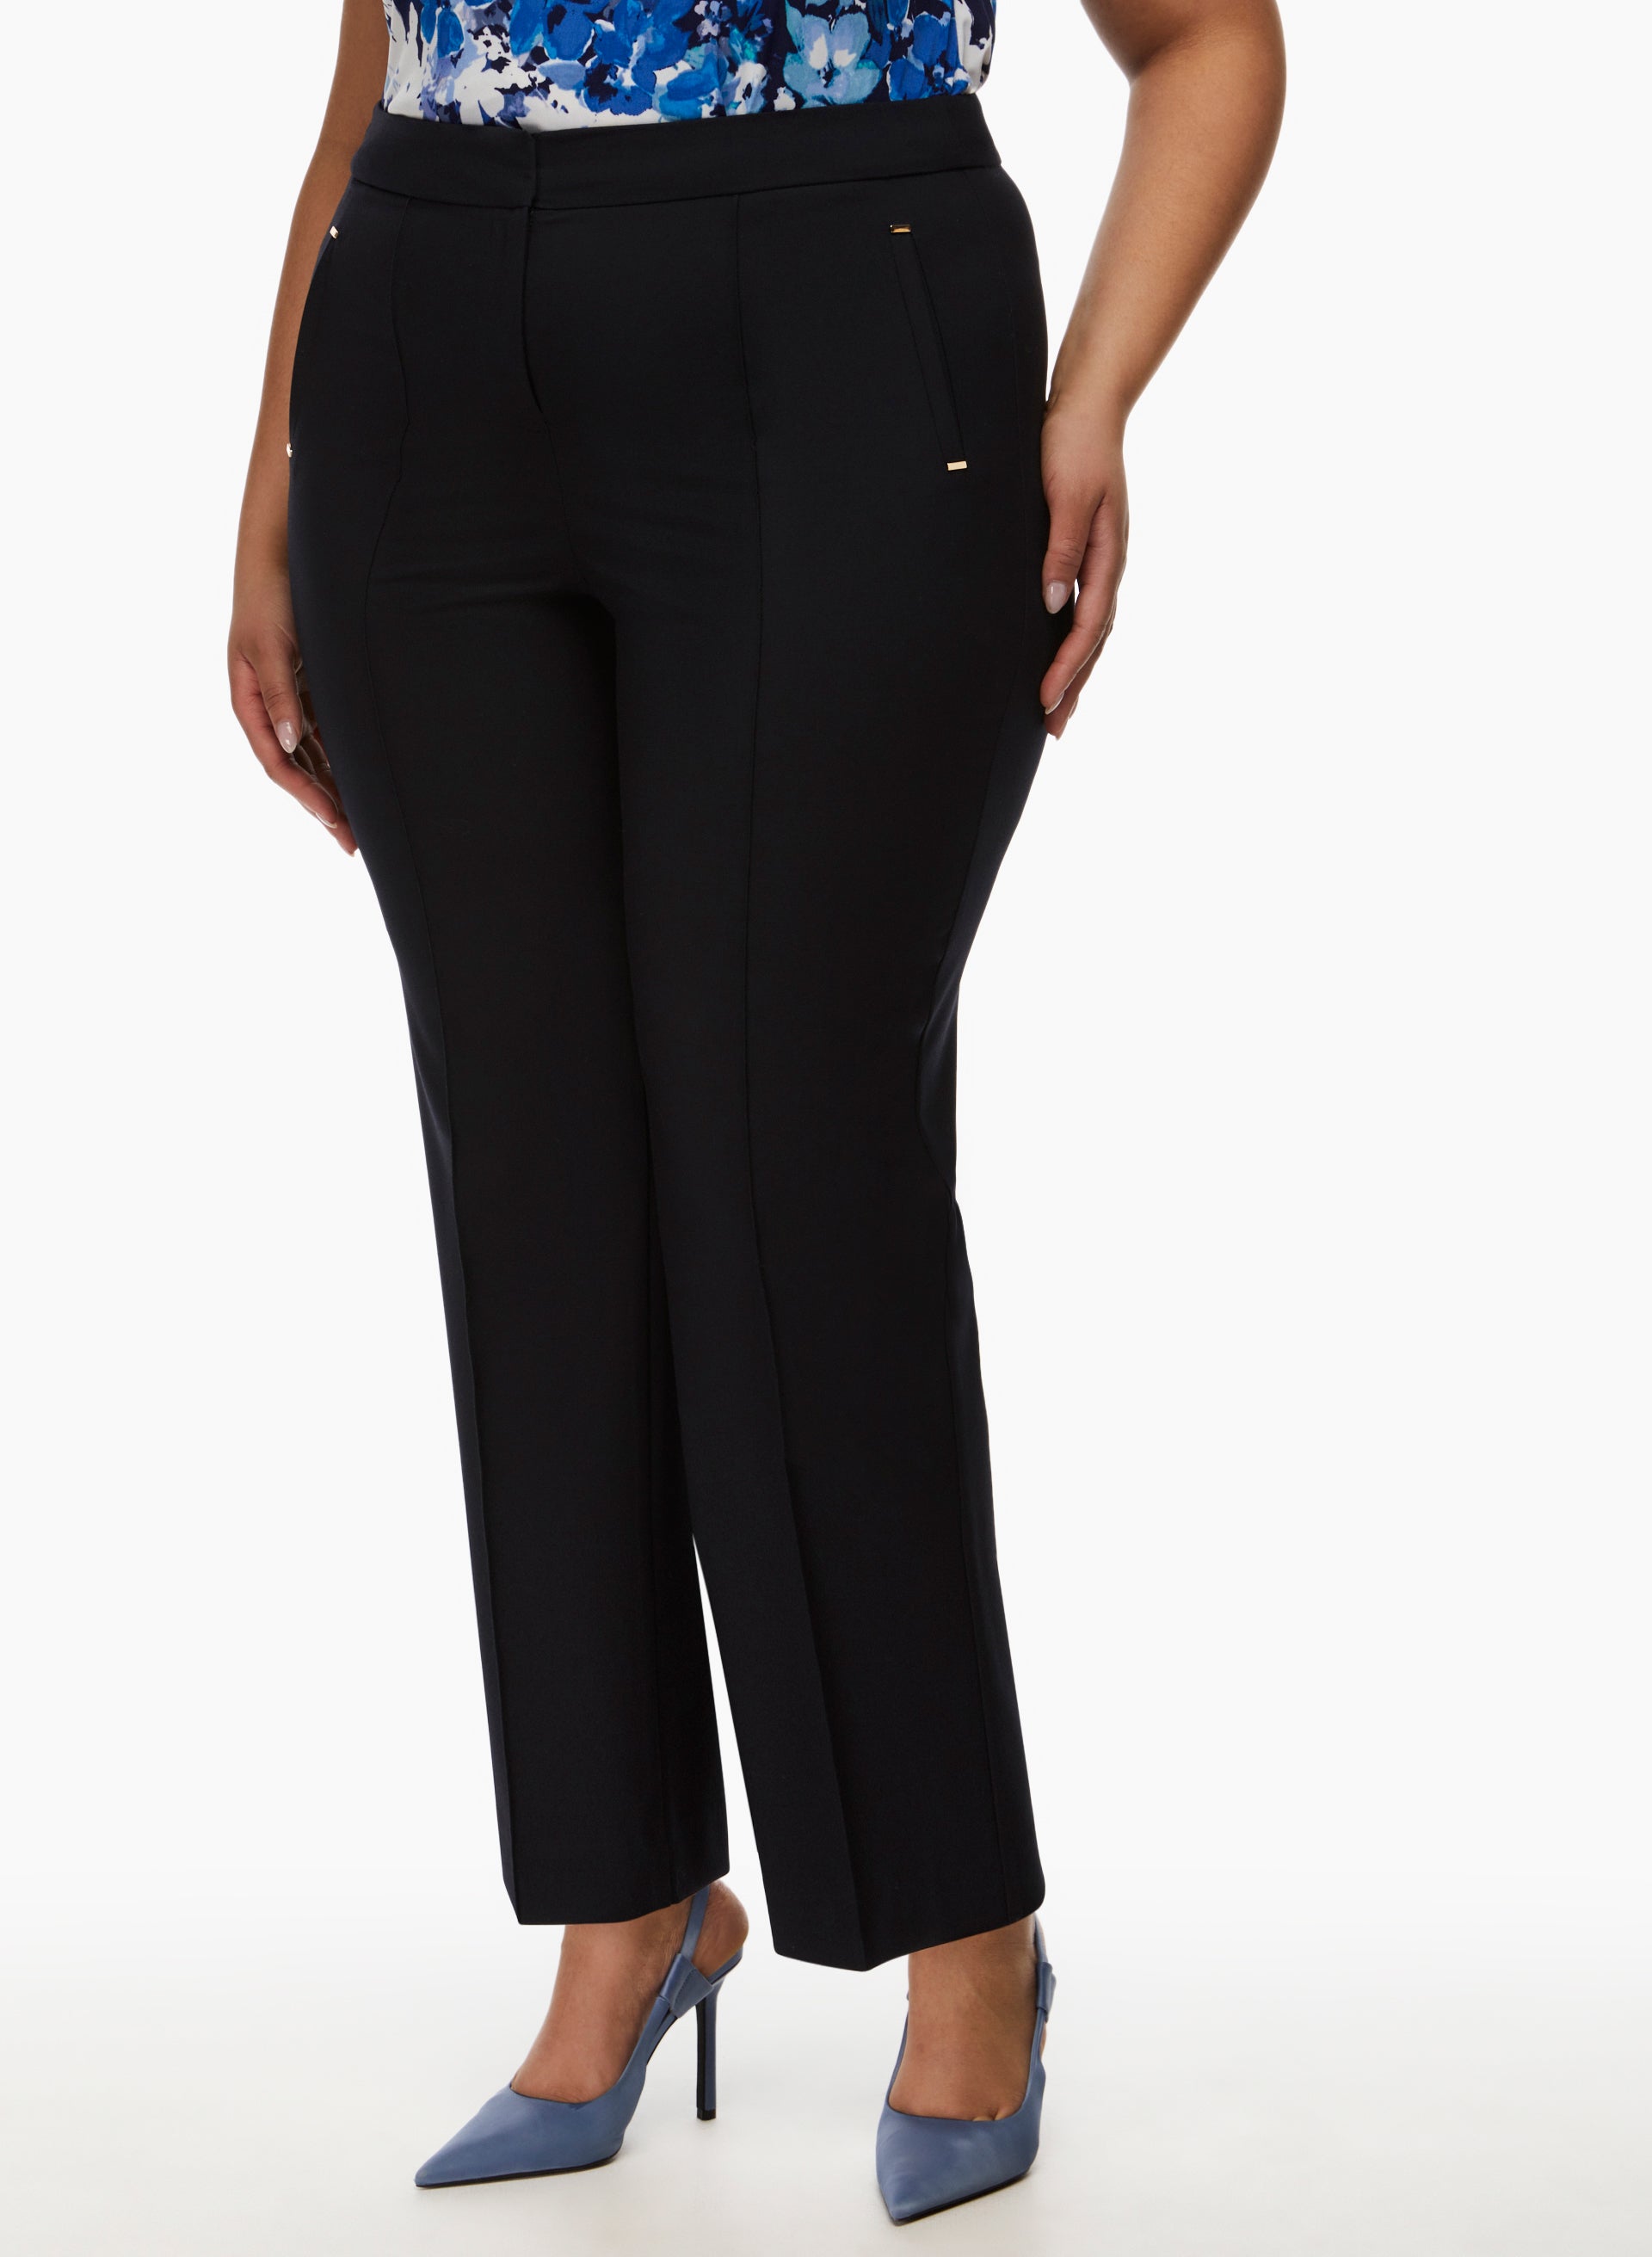 Bigersell Stretch Pant for Women Full Length Pants Fashion Women